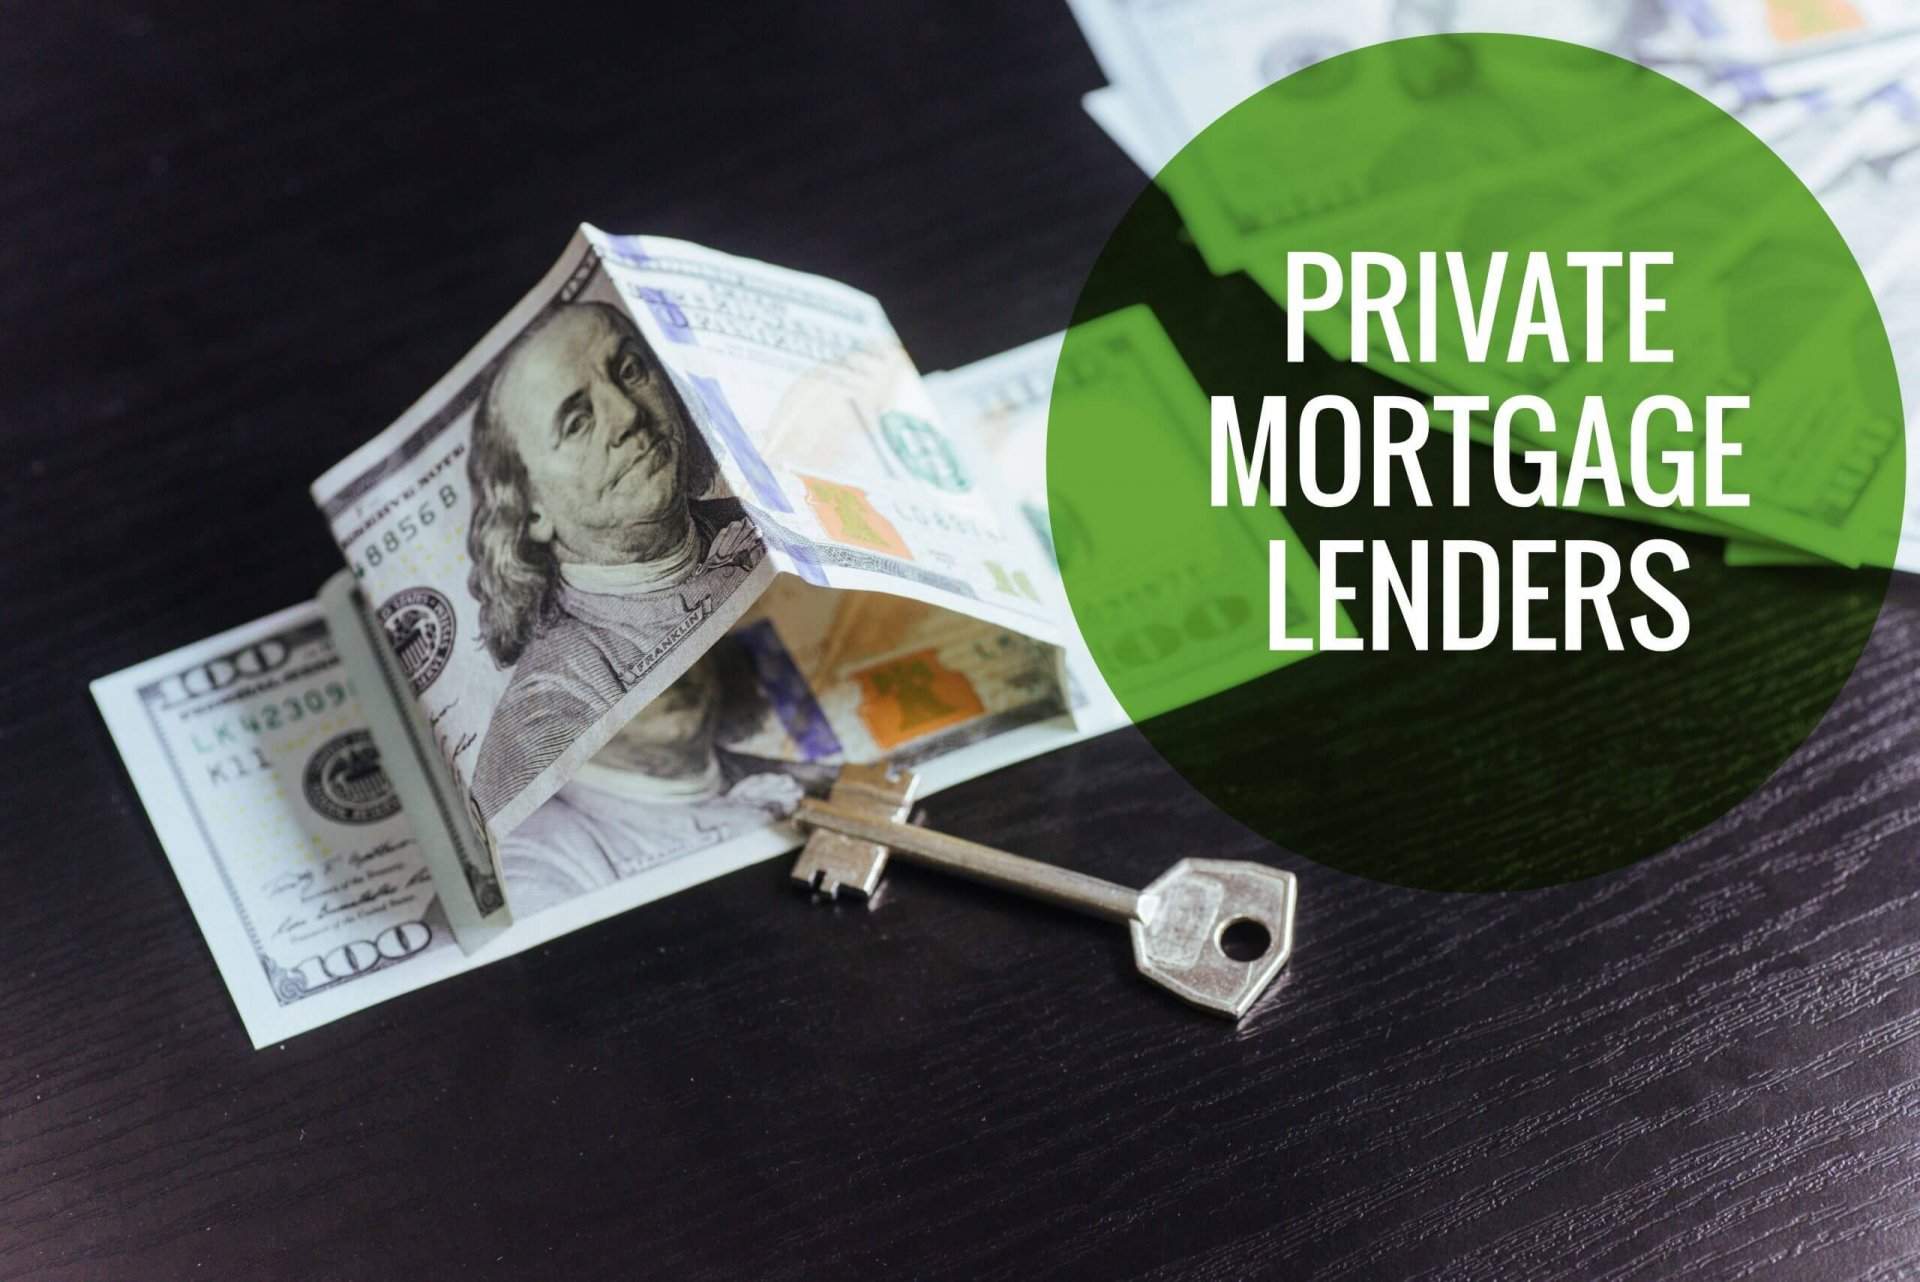 Private Mortgage Lenders: A Unique and Valuable Alternative to Banks